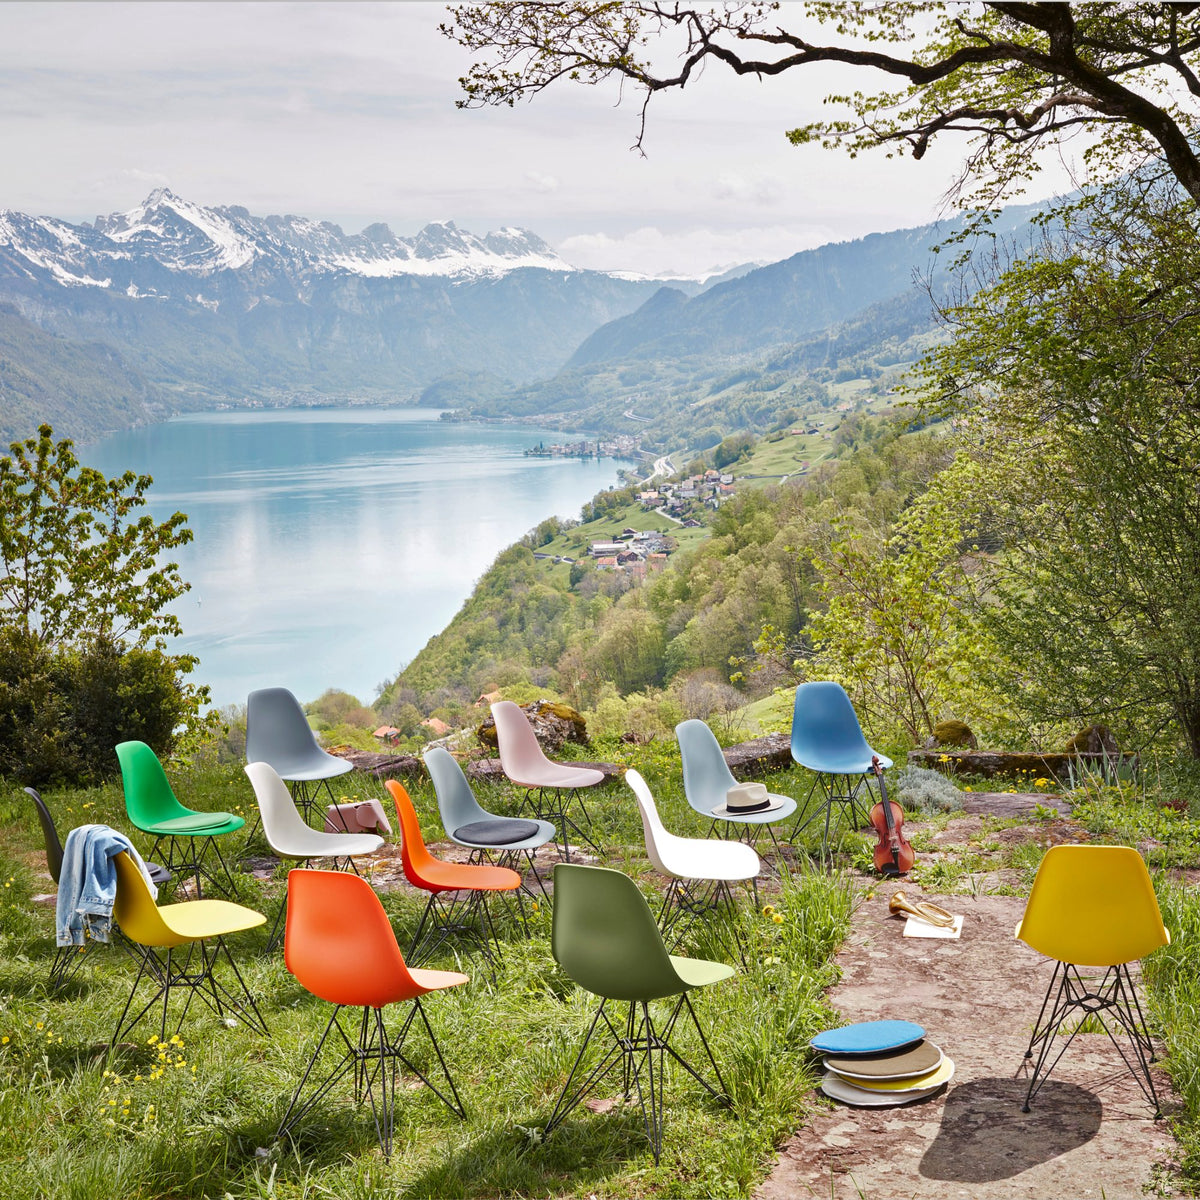 Vitra Eames Plastic Side Chair DSR Powder Coated for Outdoor Use. Garden Chairs Alps Setting